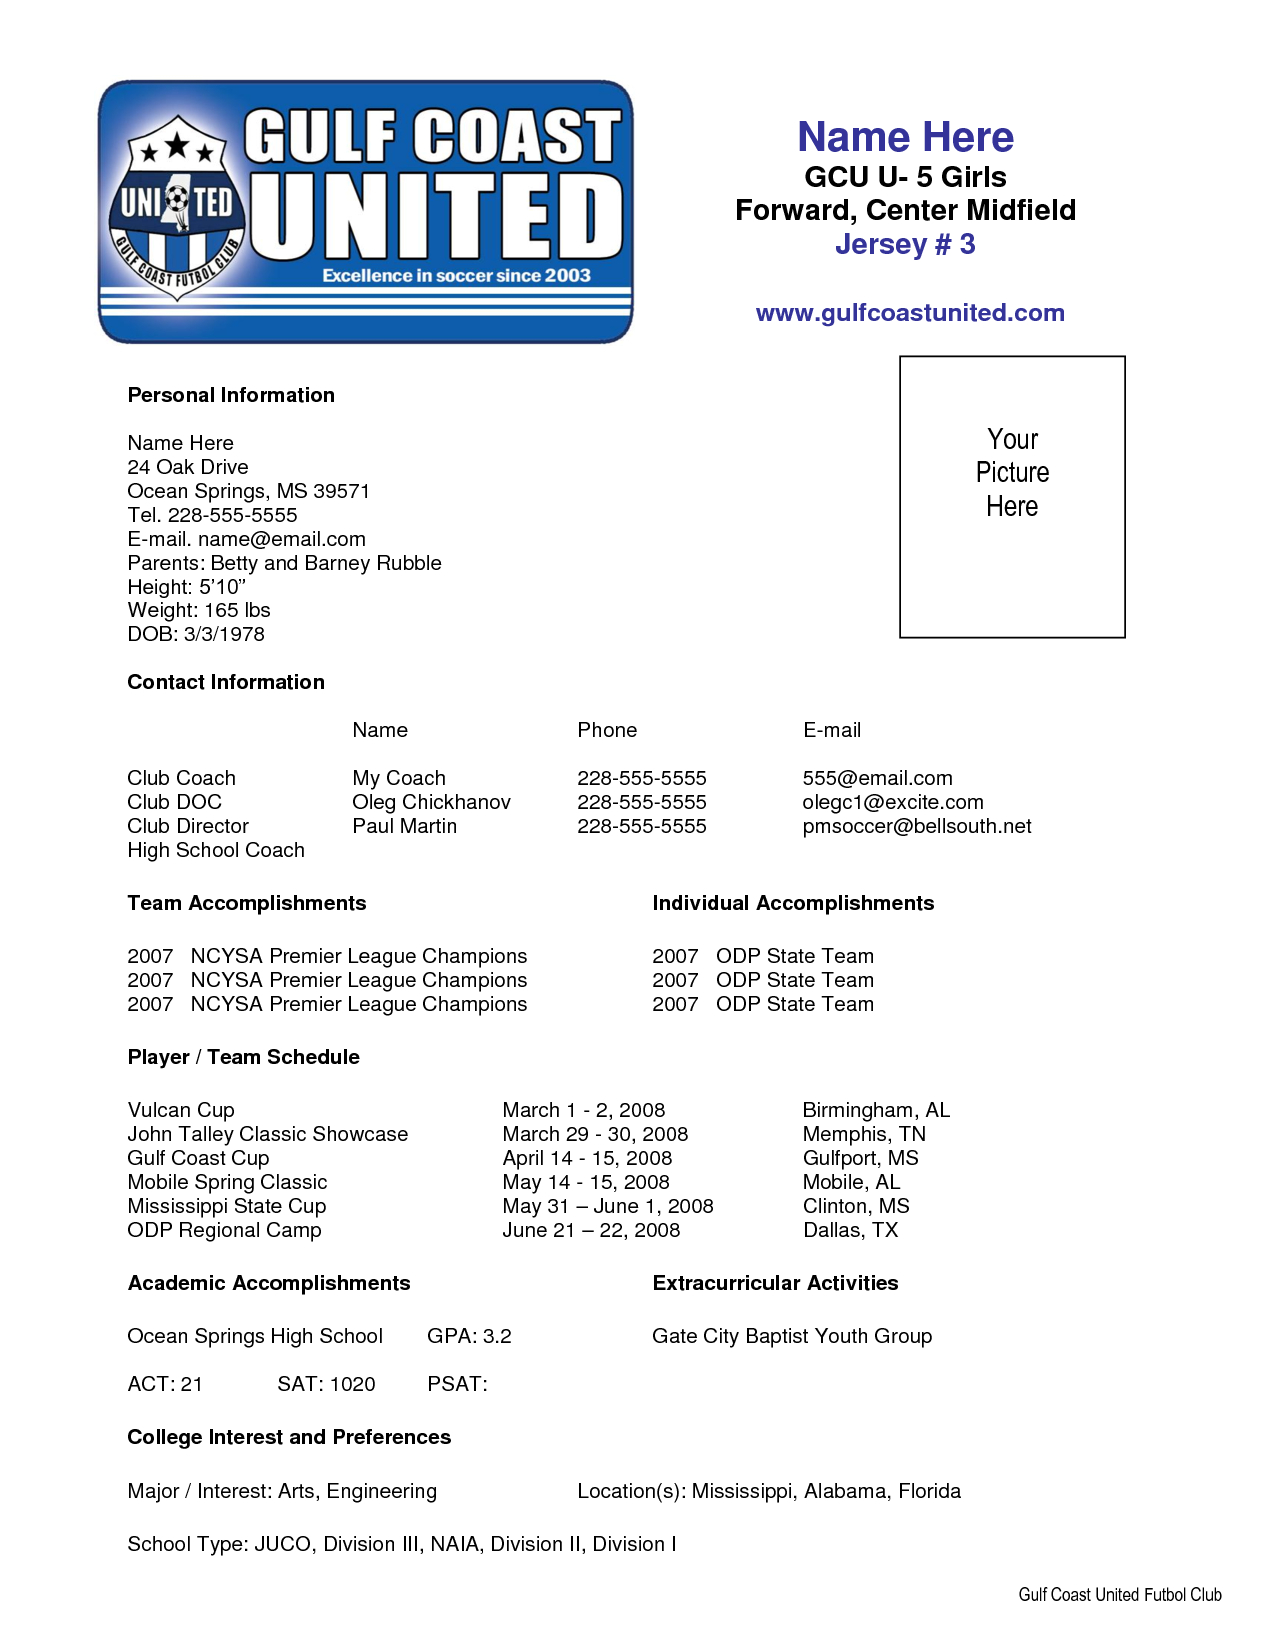 Sample Soccer Resume Coaching Business Best Resume Template in sizing 1275 X 1650